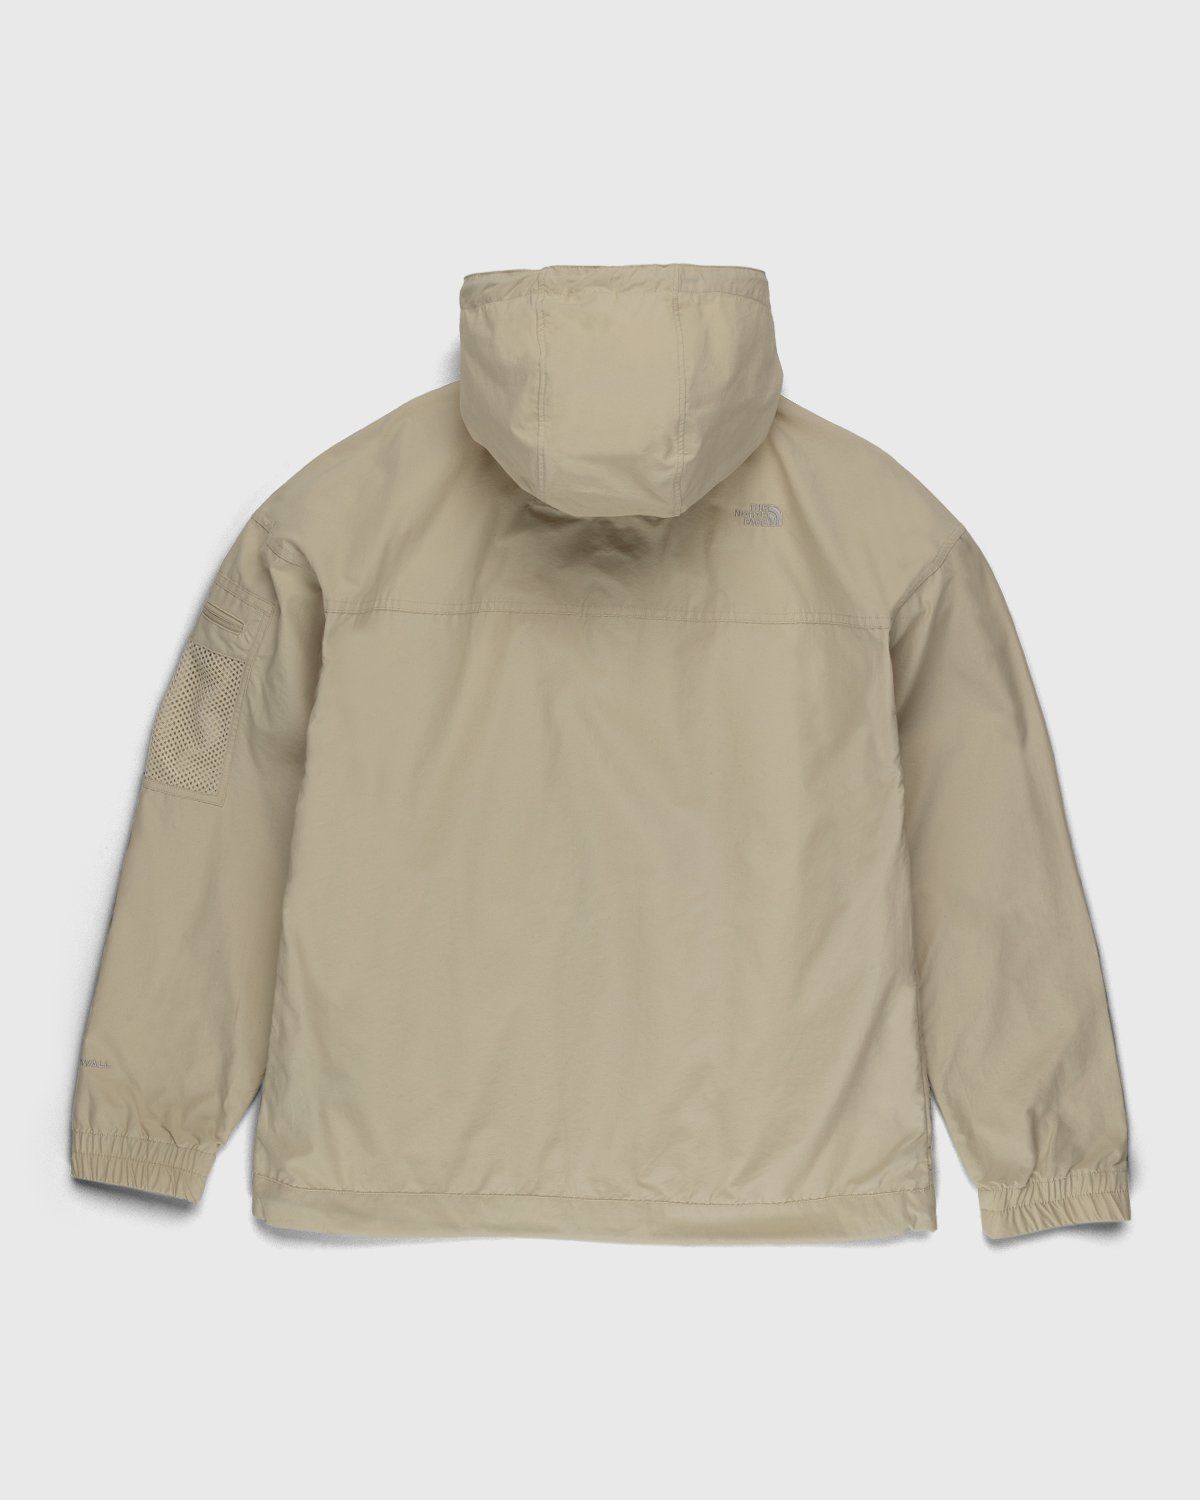 The North Face – Sky Valley Windbreaker Jacket Gravel - Outerwear - Beige - Image 2